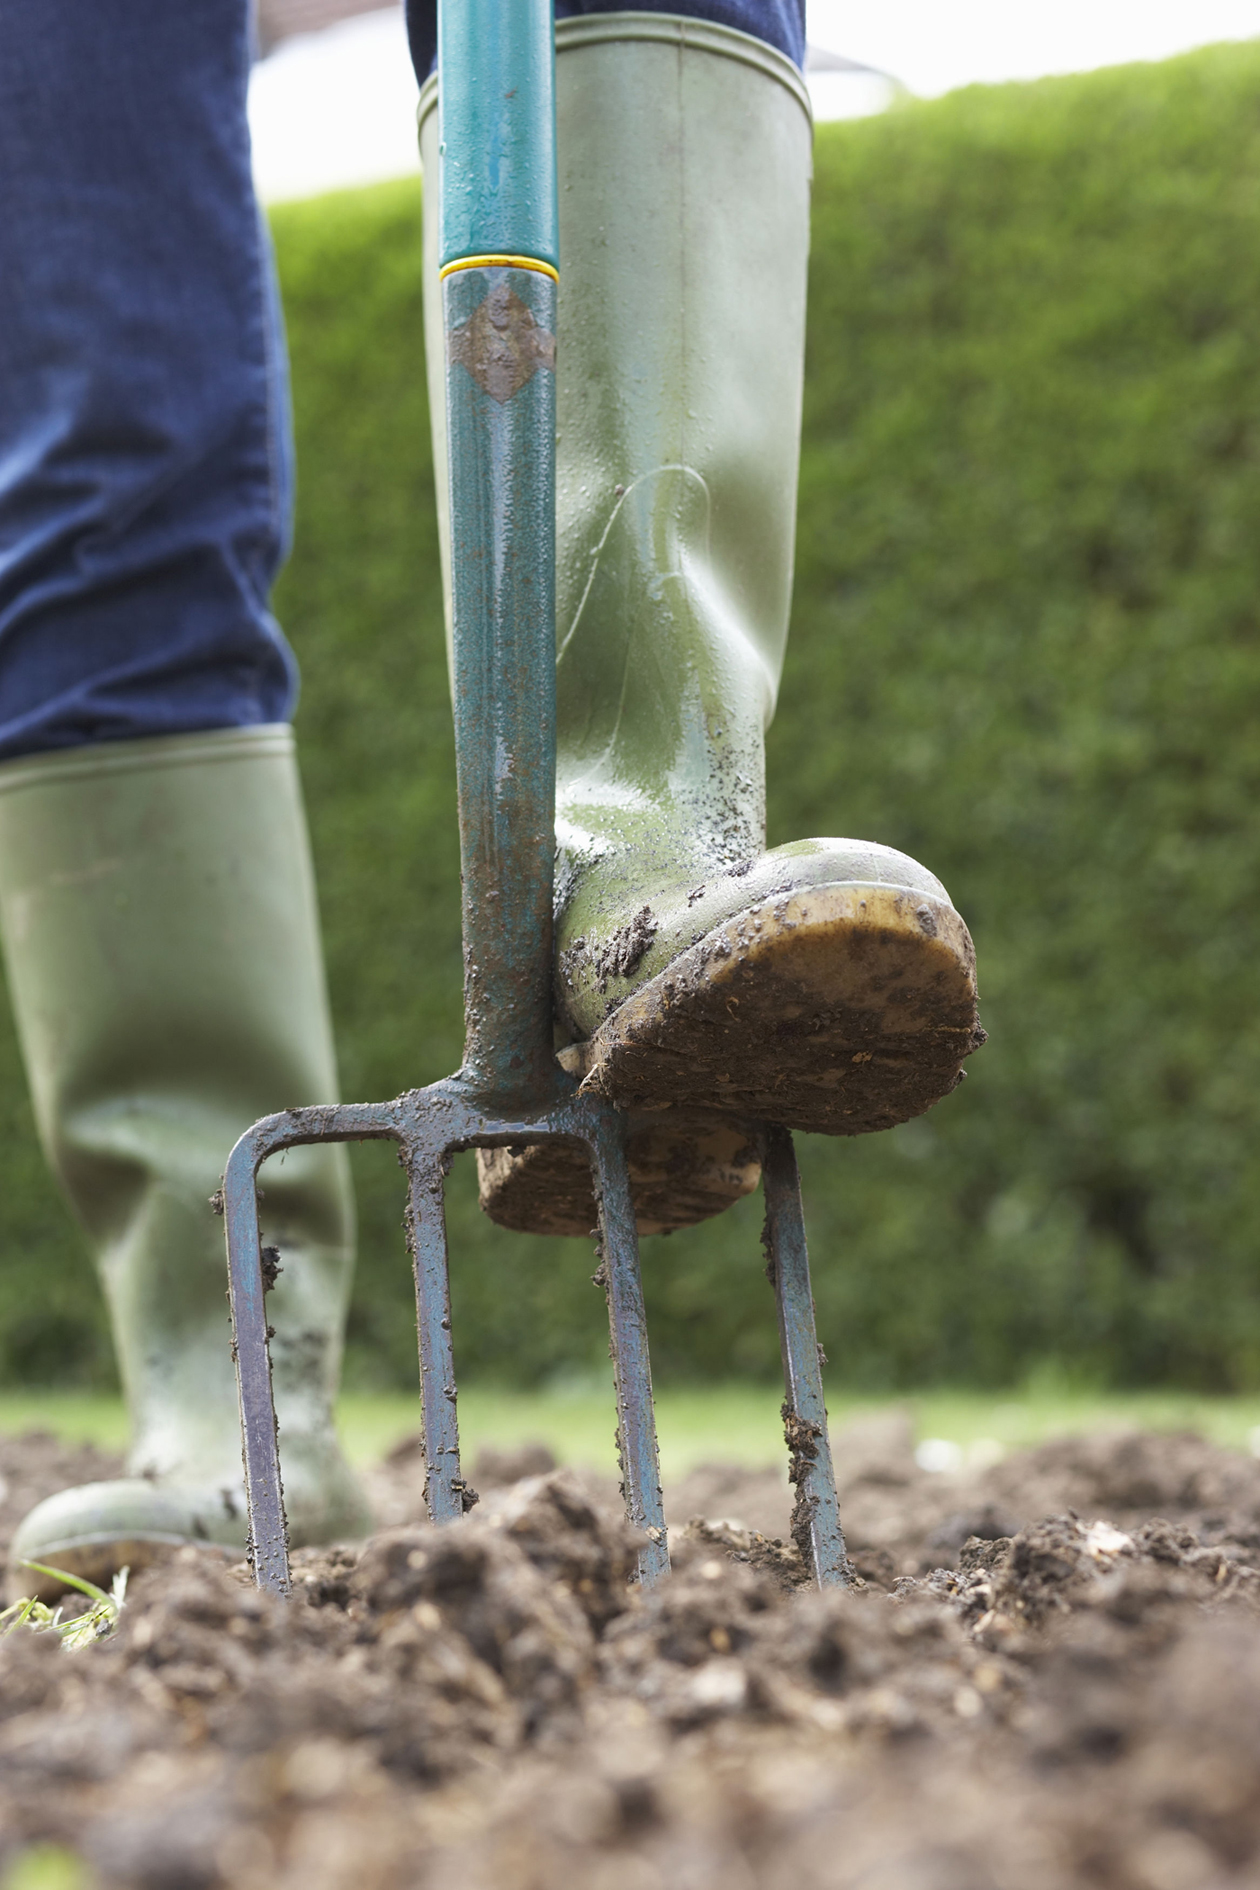 Take care when digging up tubers (Thinkstock/PA)